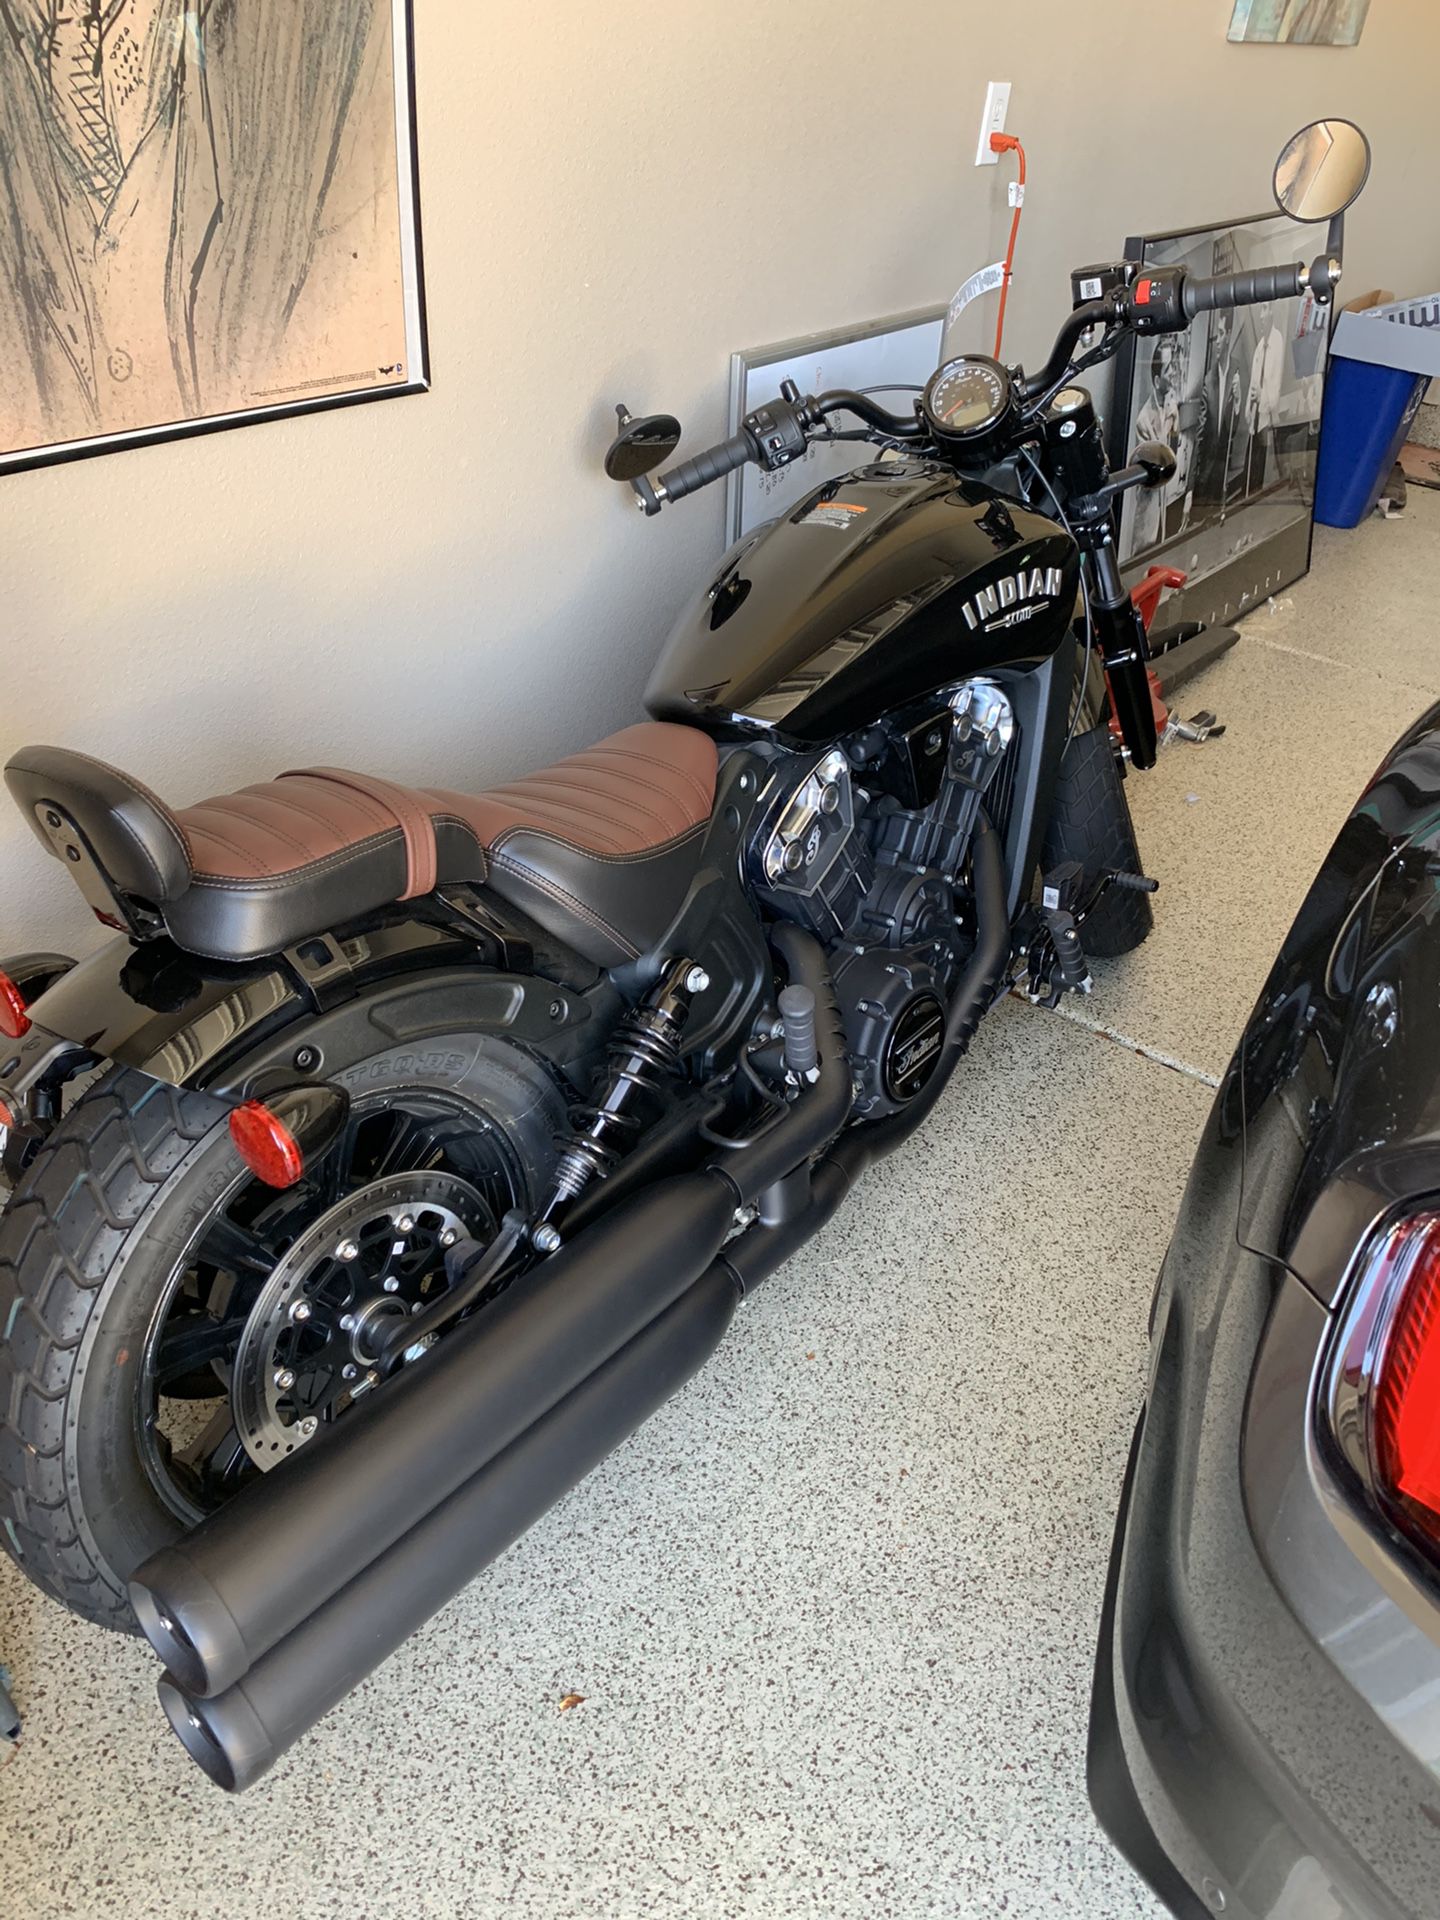 2020 Indian scout bobber motorcycle